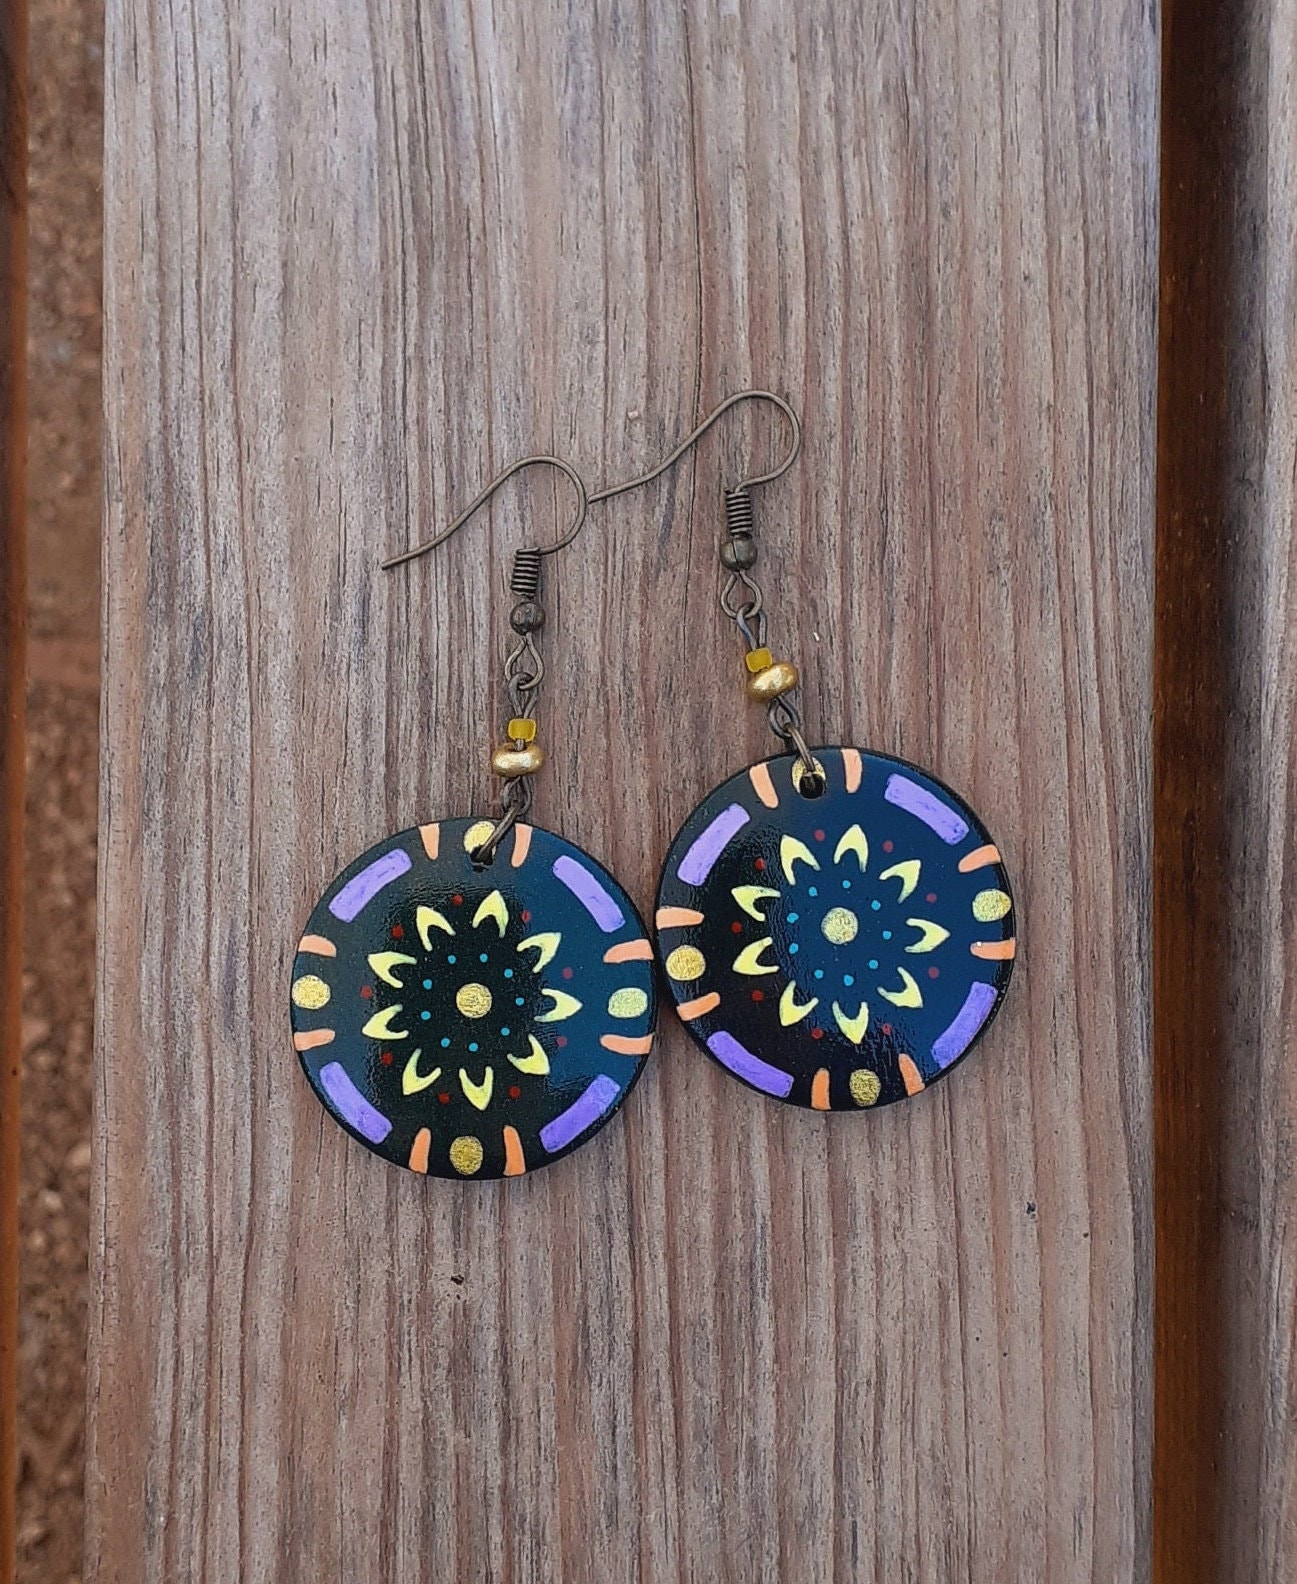 Asexual earrings handmade. Hand painted wooden round earring - Inspire  Uplift